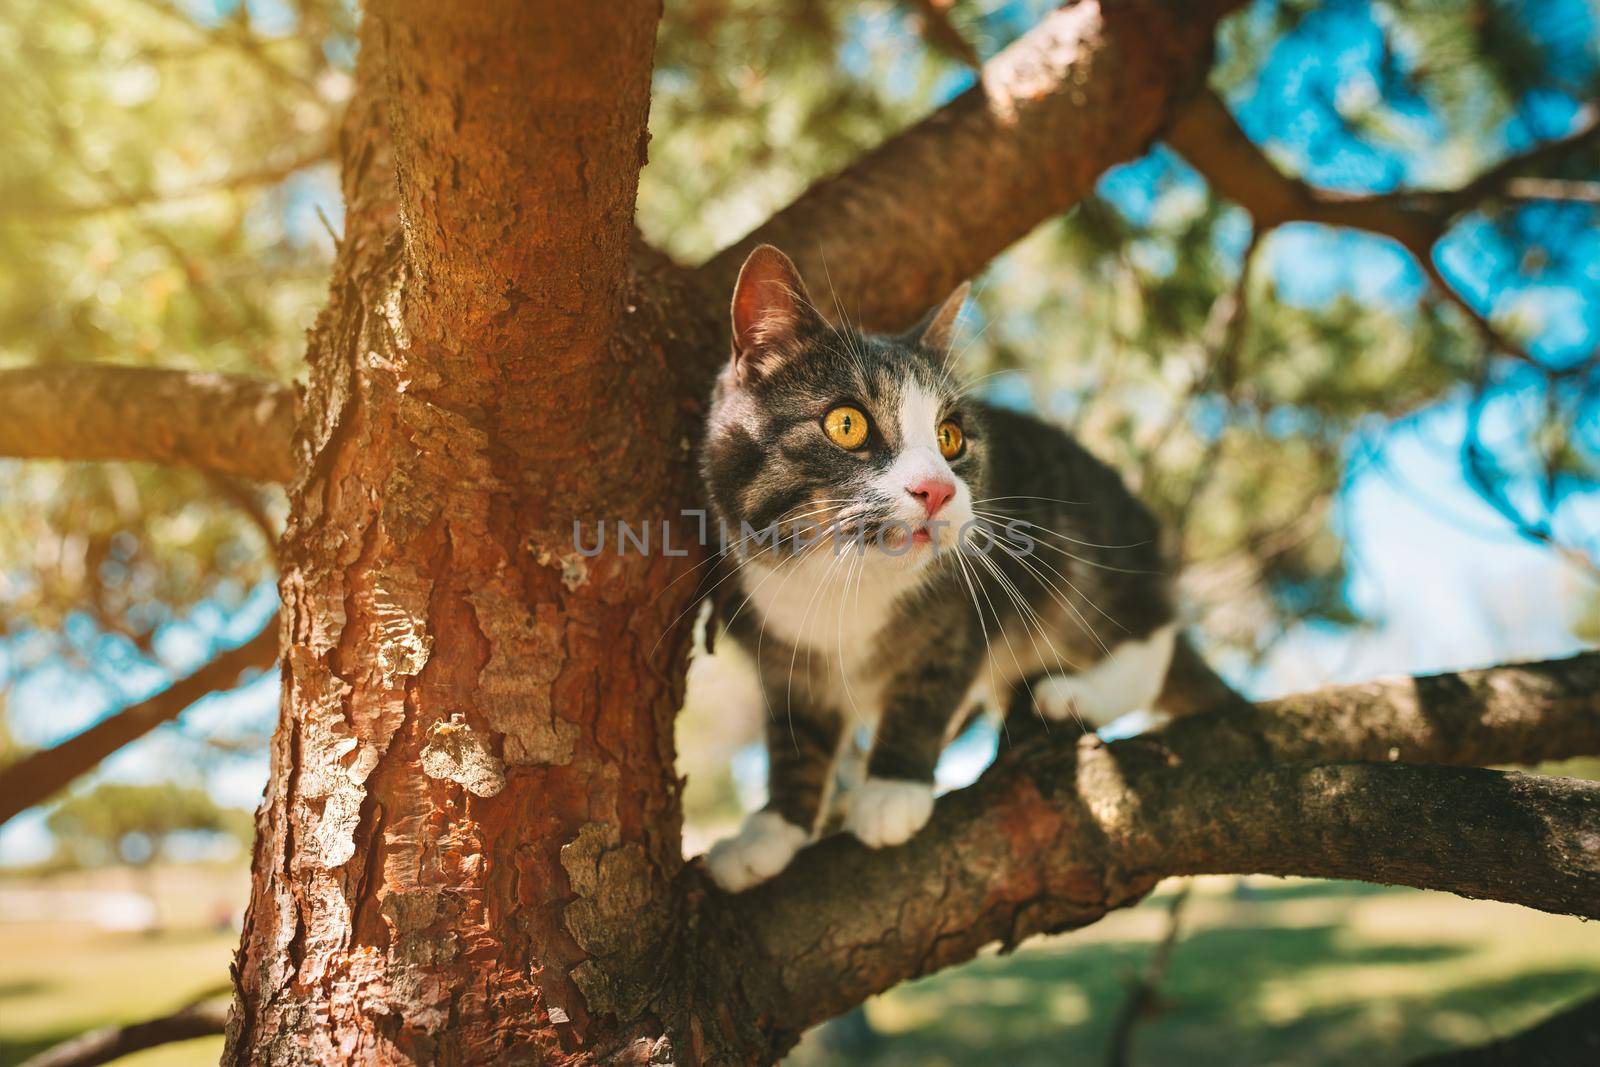 Cute cat sitting on a tree outdoors in nature on a sunny day. High quality photo